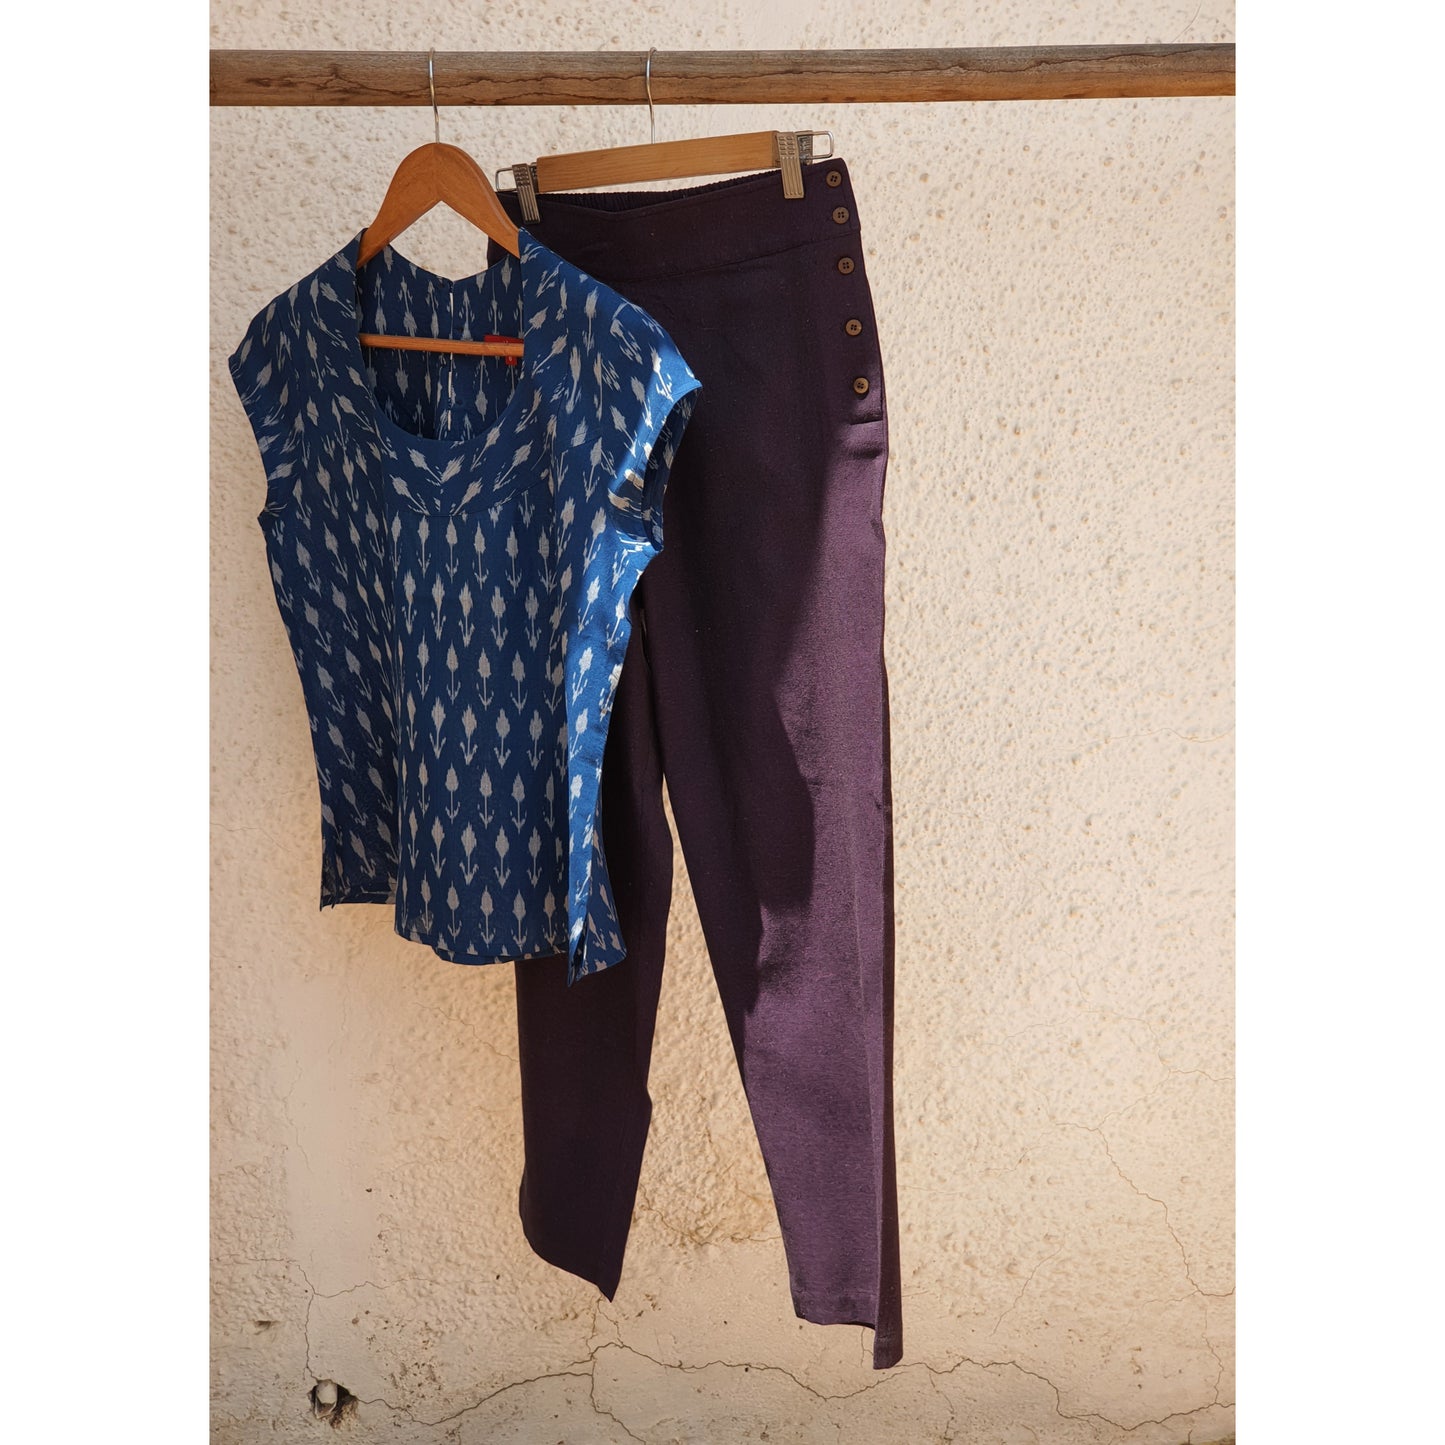 image of ink blue ikkat top paired with purple pants